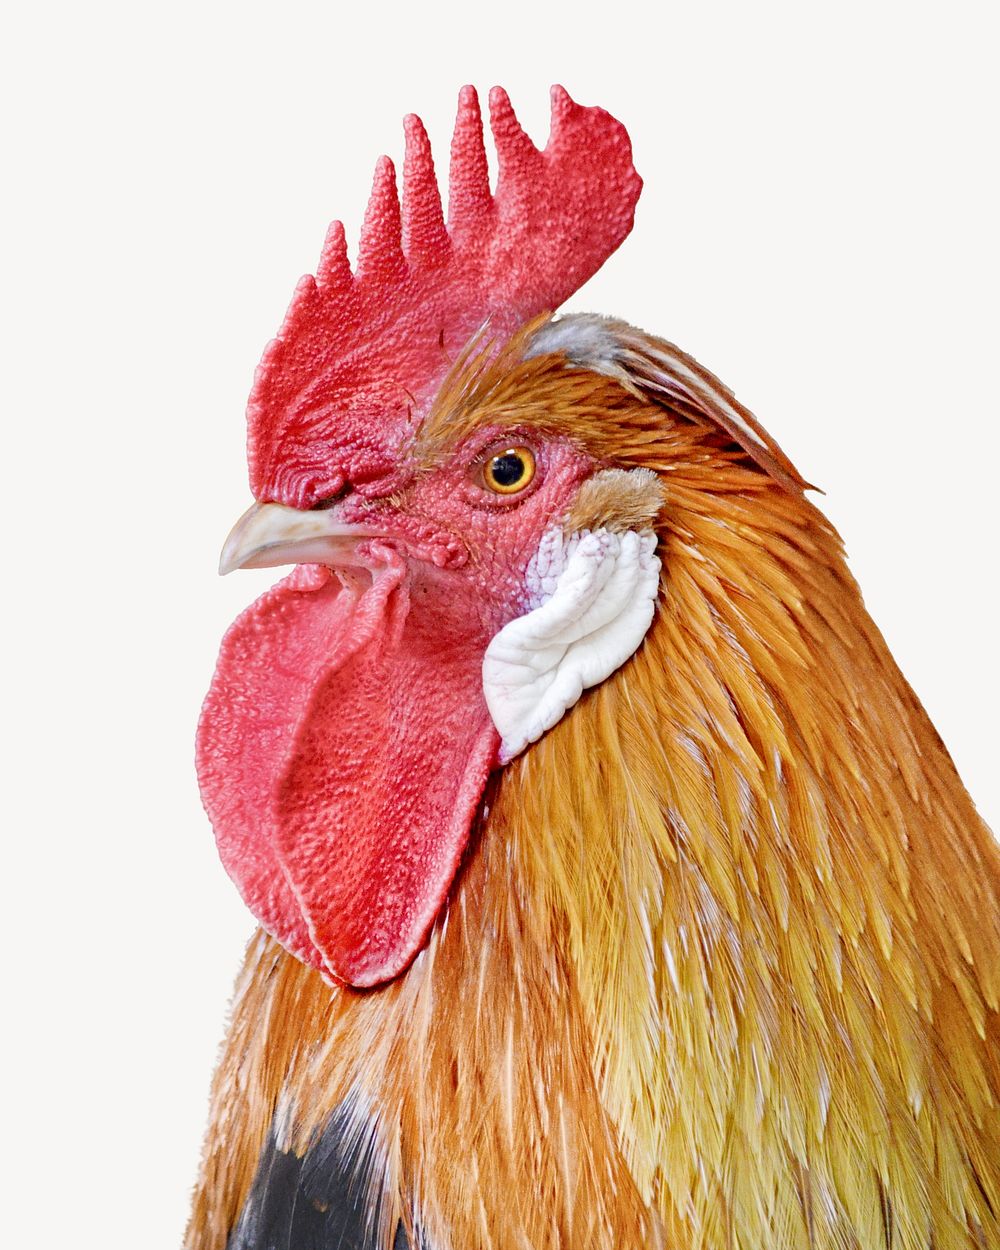 Rooster bird isolated image